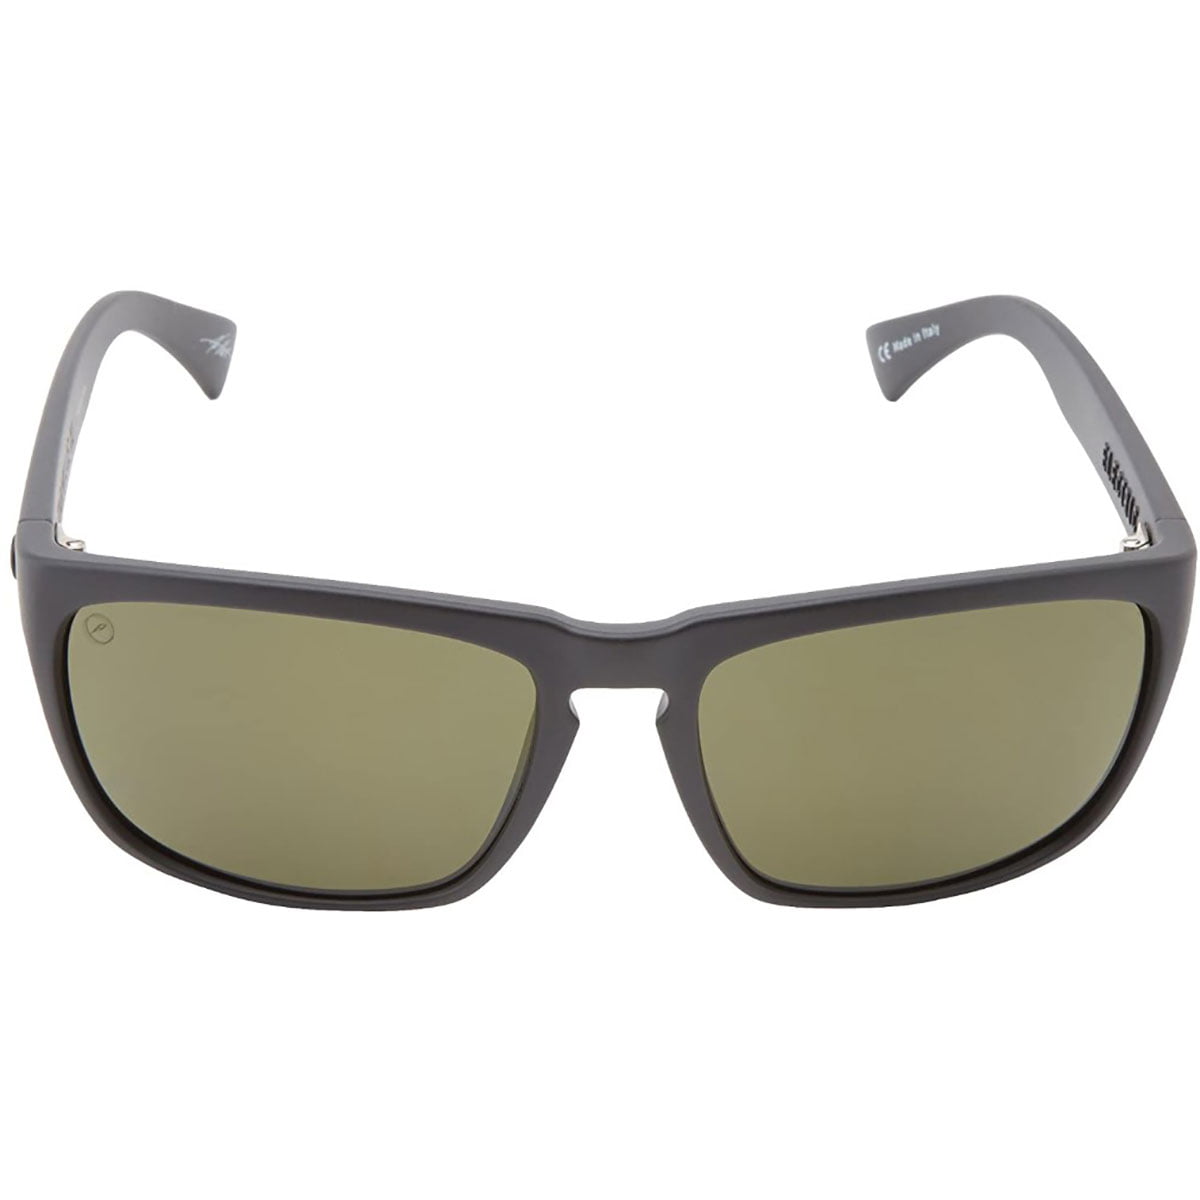 Electric Sunglasses Knoxville XL Matte  Black OHM Polarized Grey  EE11201042